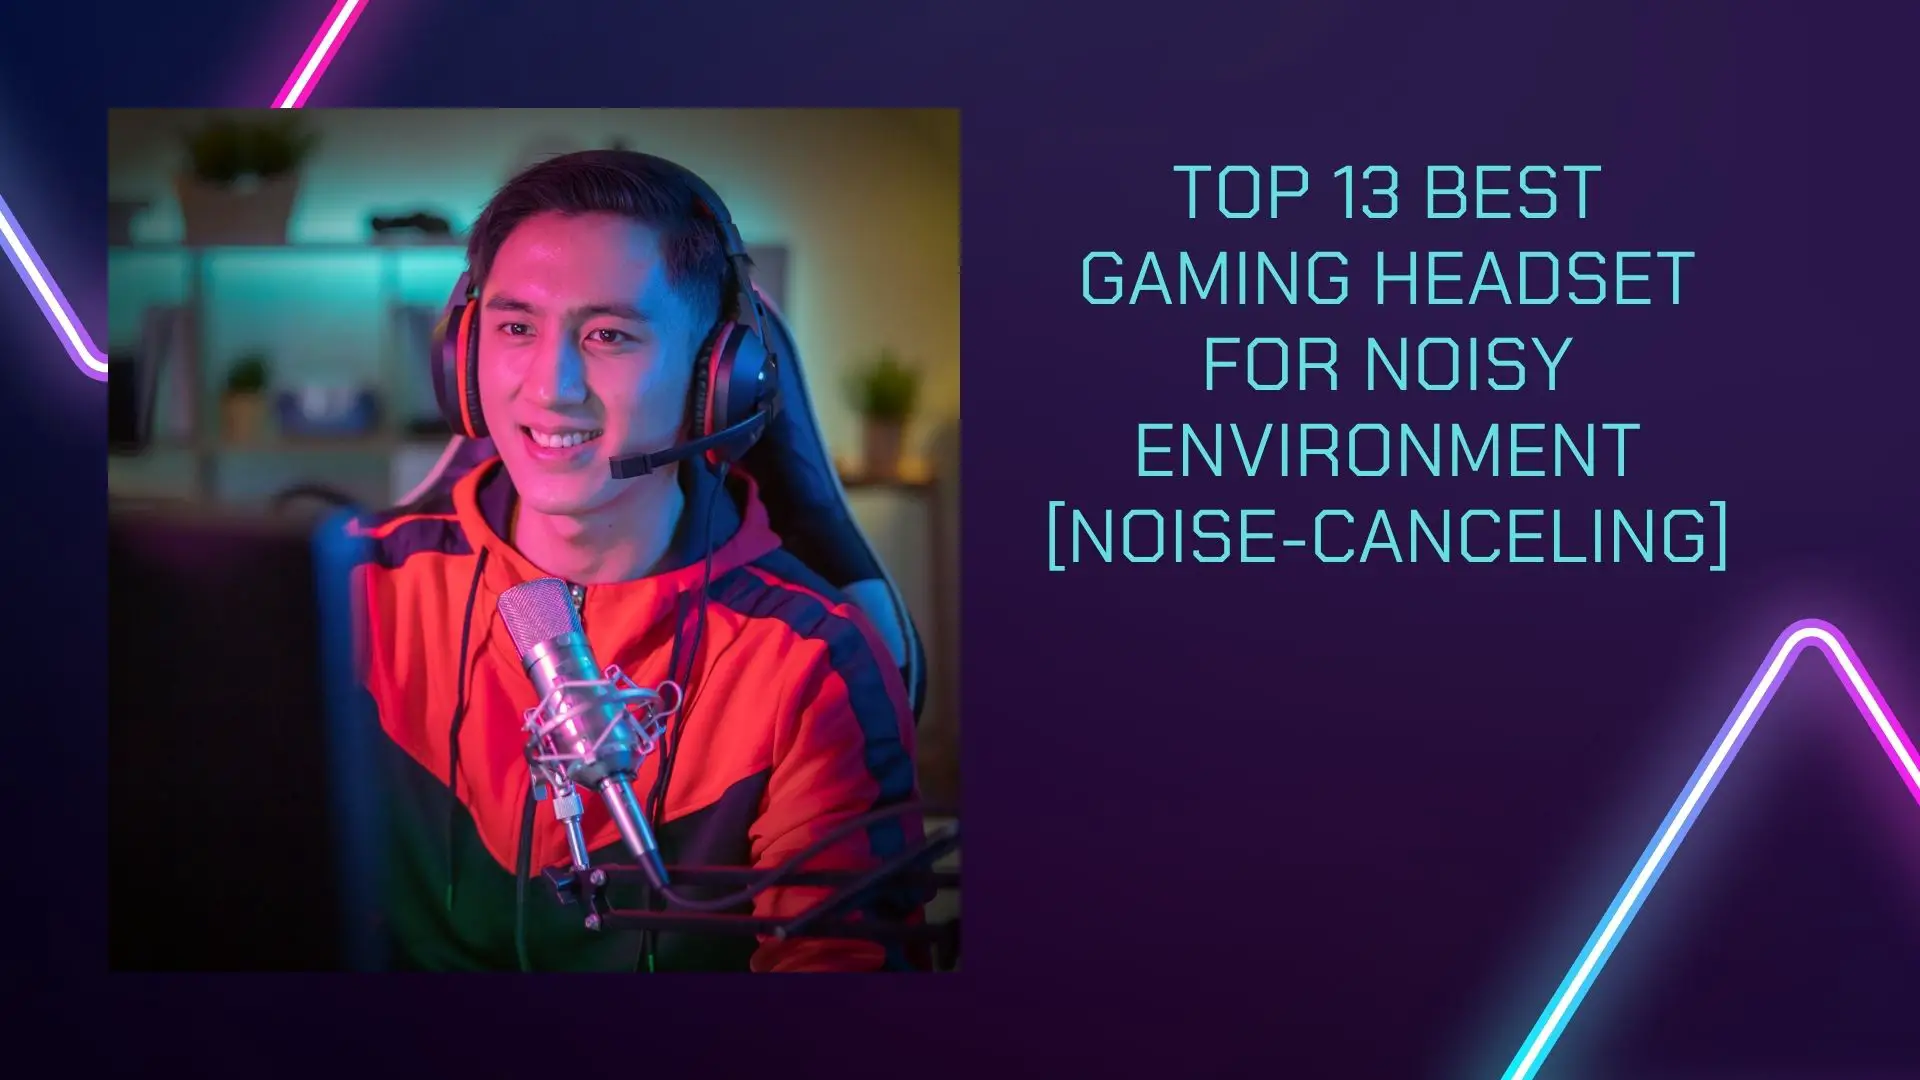 Top 13 Best Gaming Headset for Noisy Environment [Noise-Canceling]